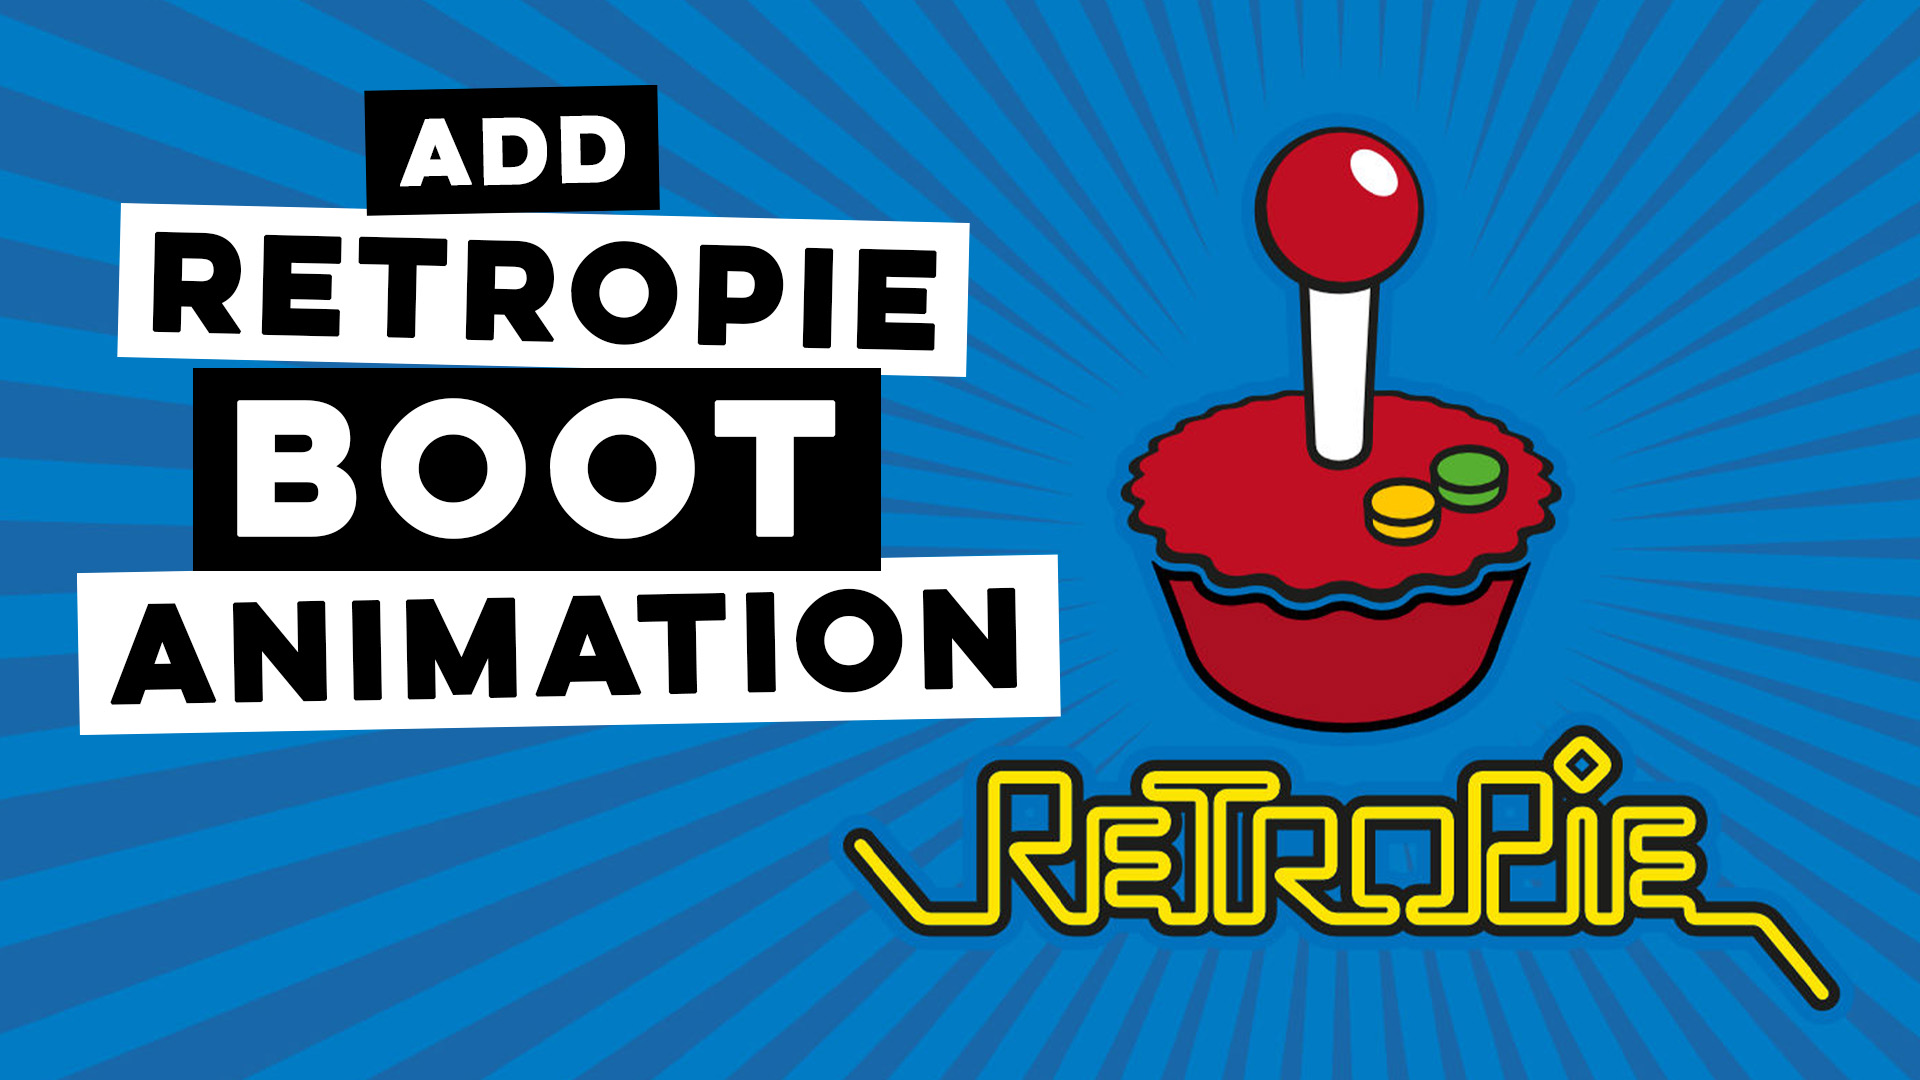 How to Add a Boot Animation to RetroPie